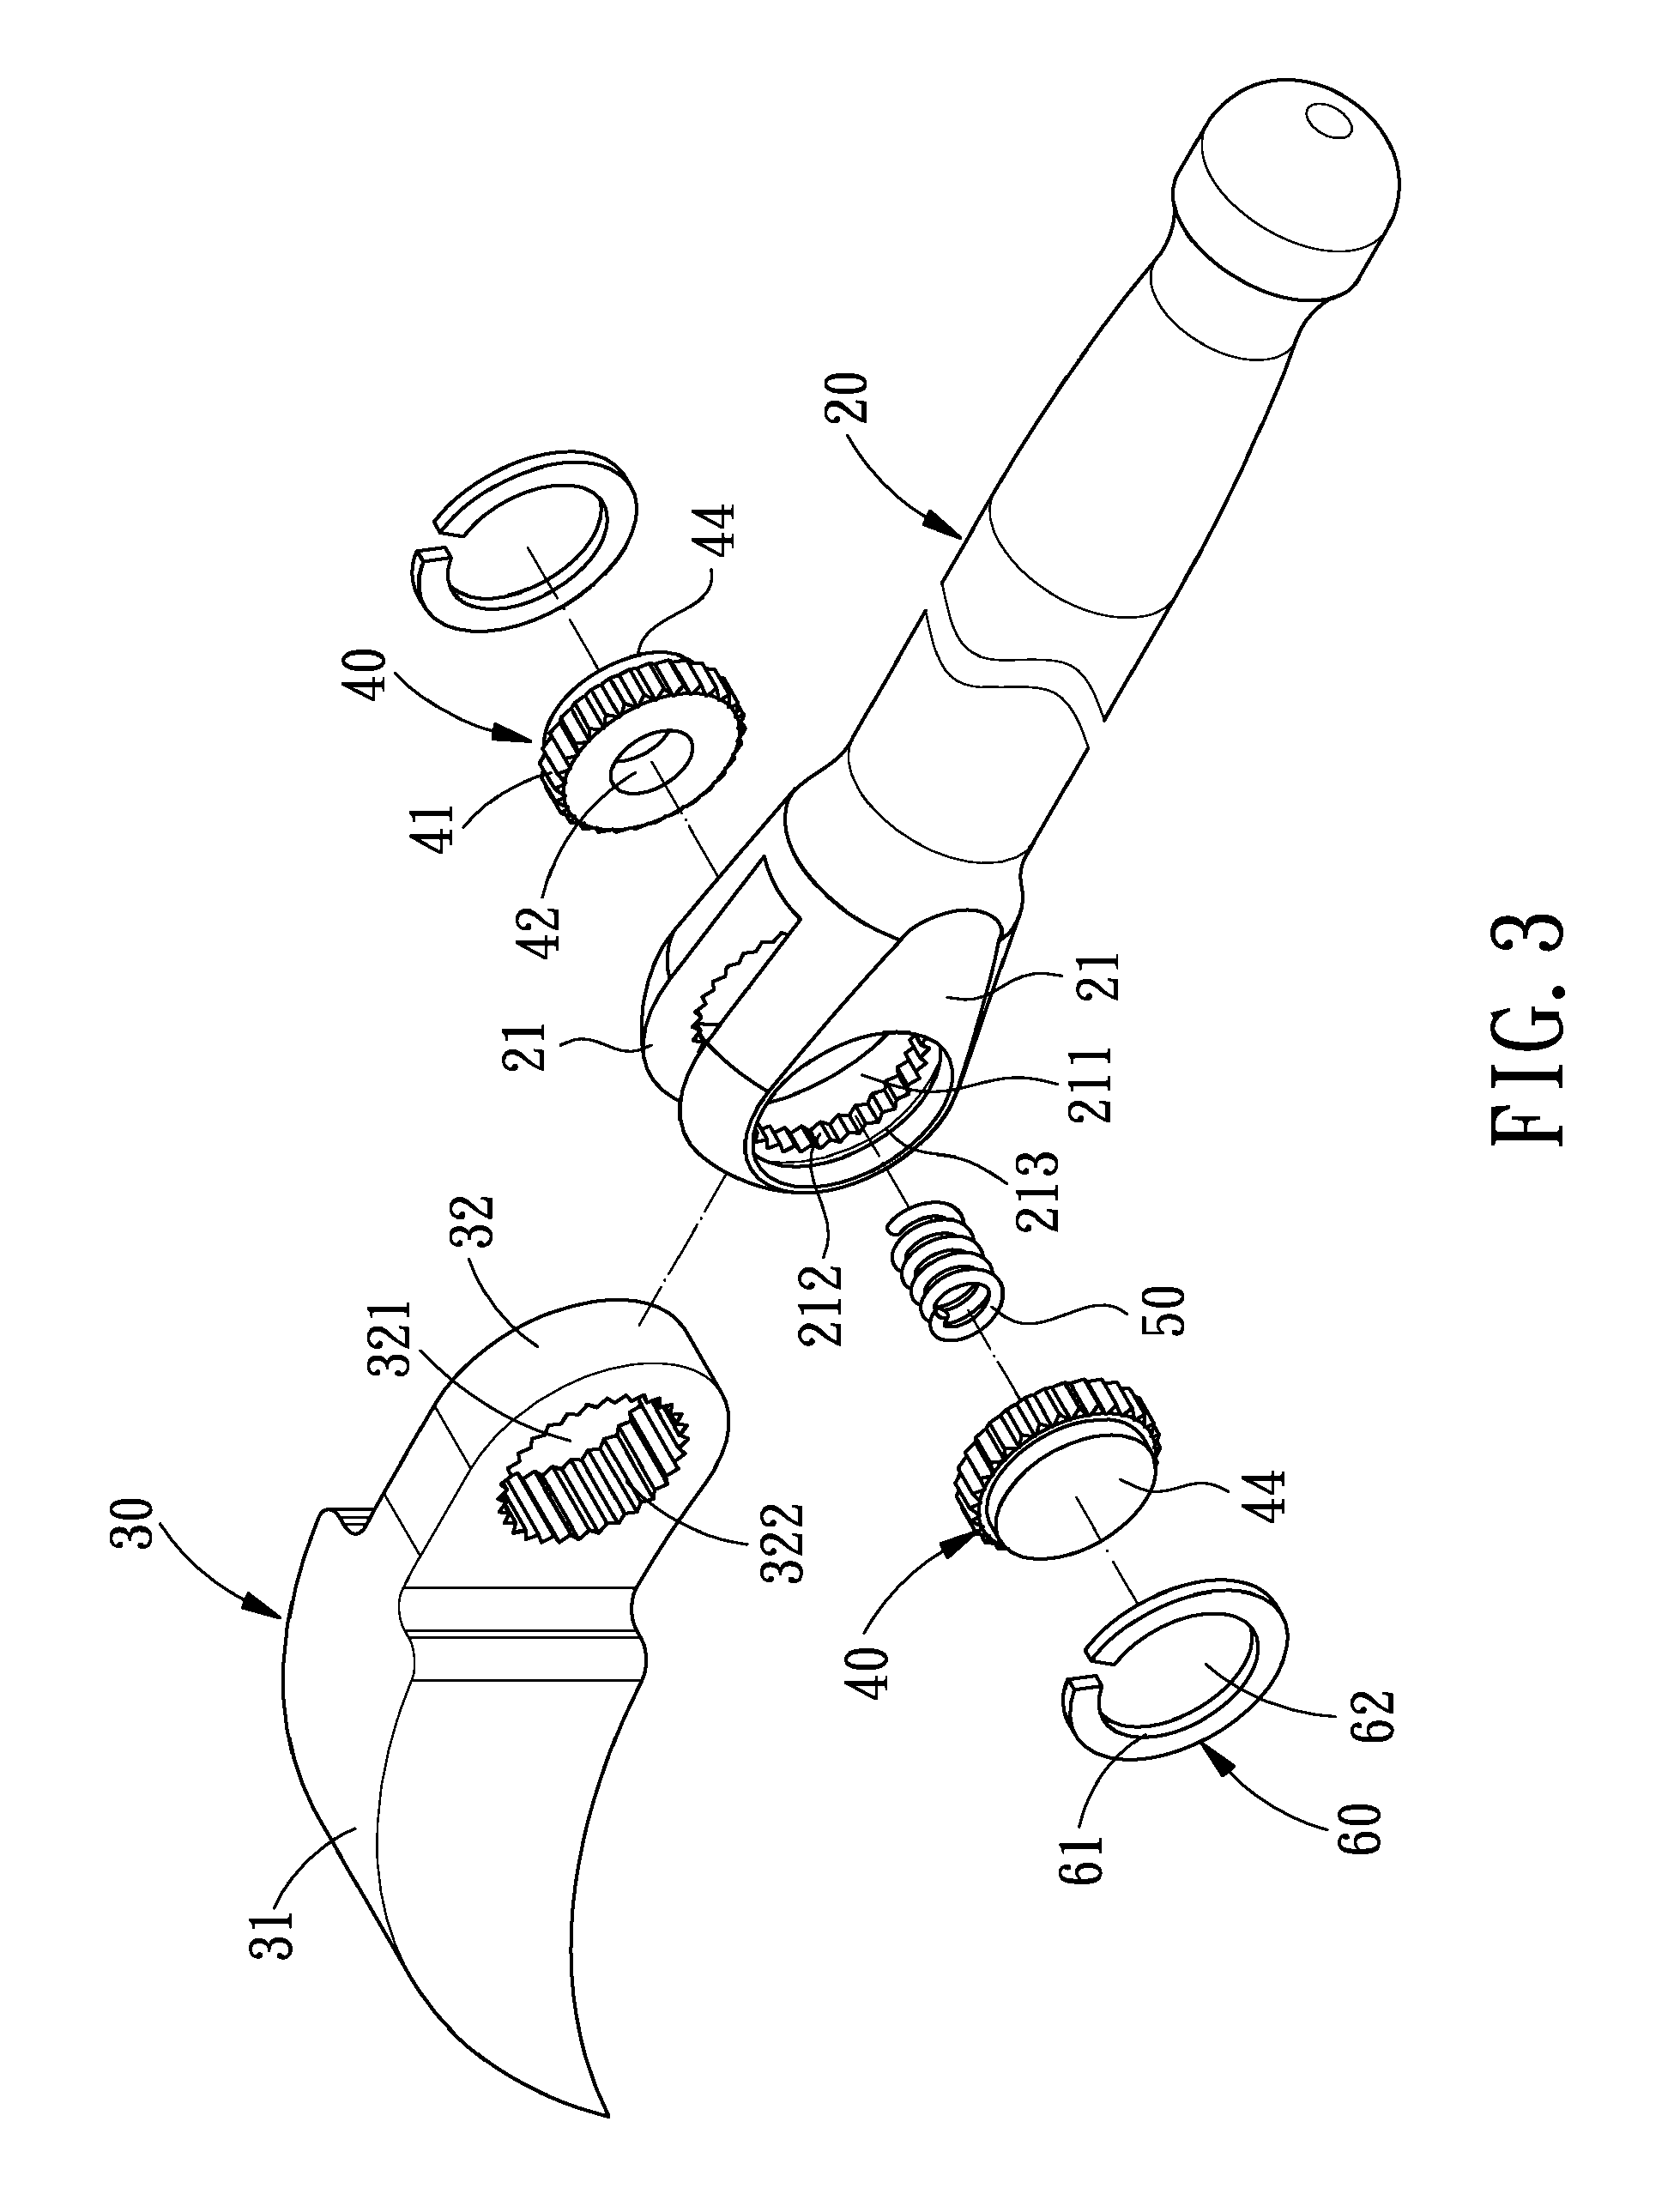 Rotation control device for a tool